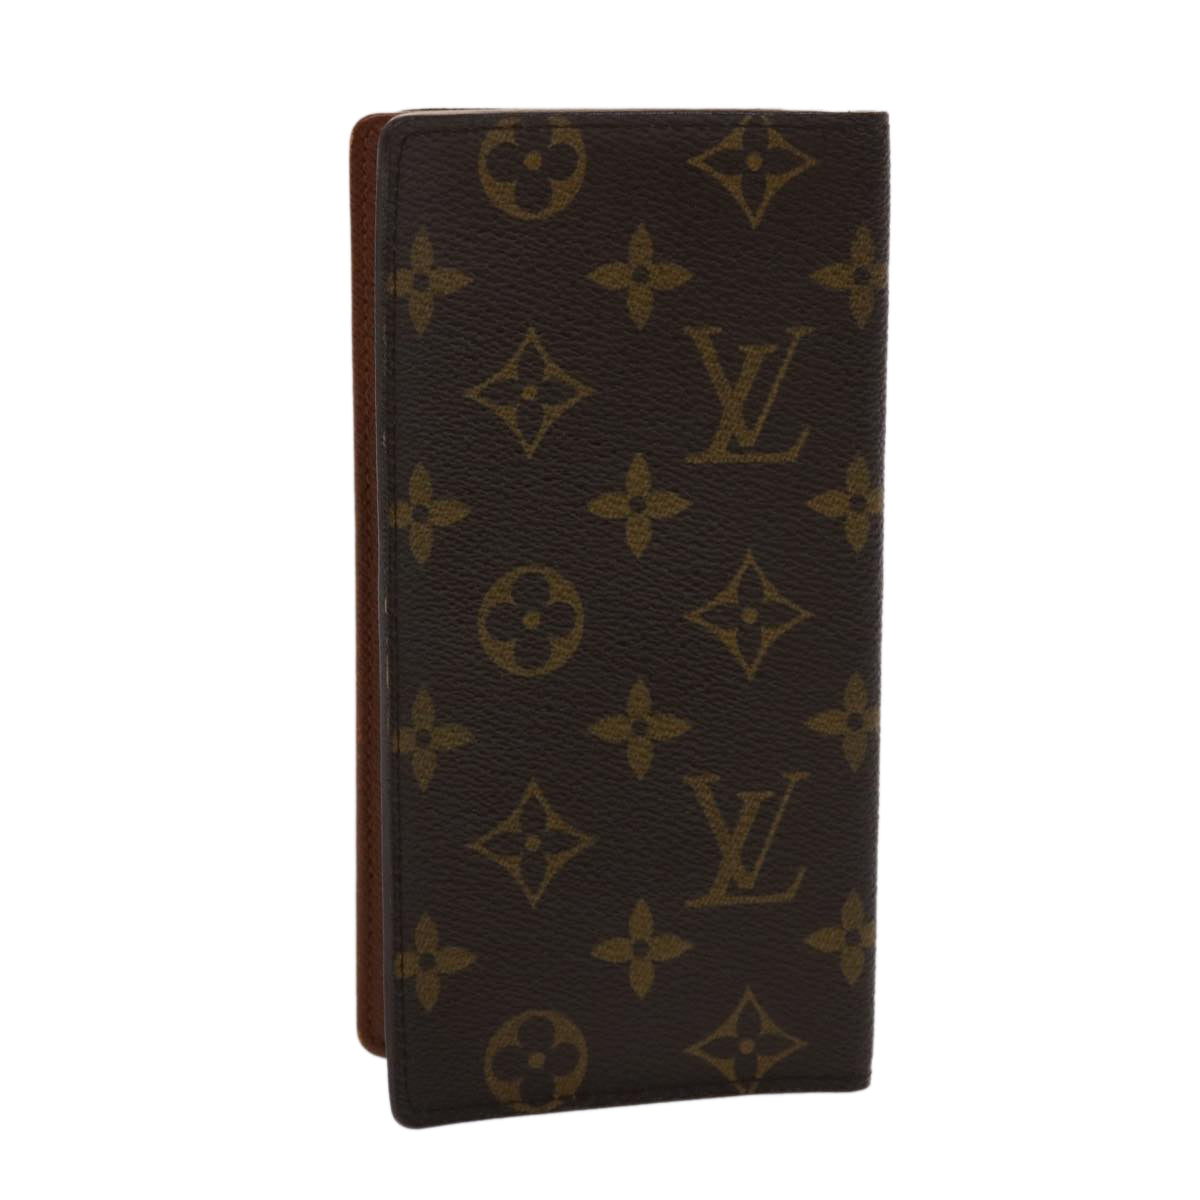 Vintage Louis Vuitton Wallet Brown Leather Made in France -  Denmark